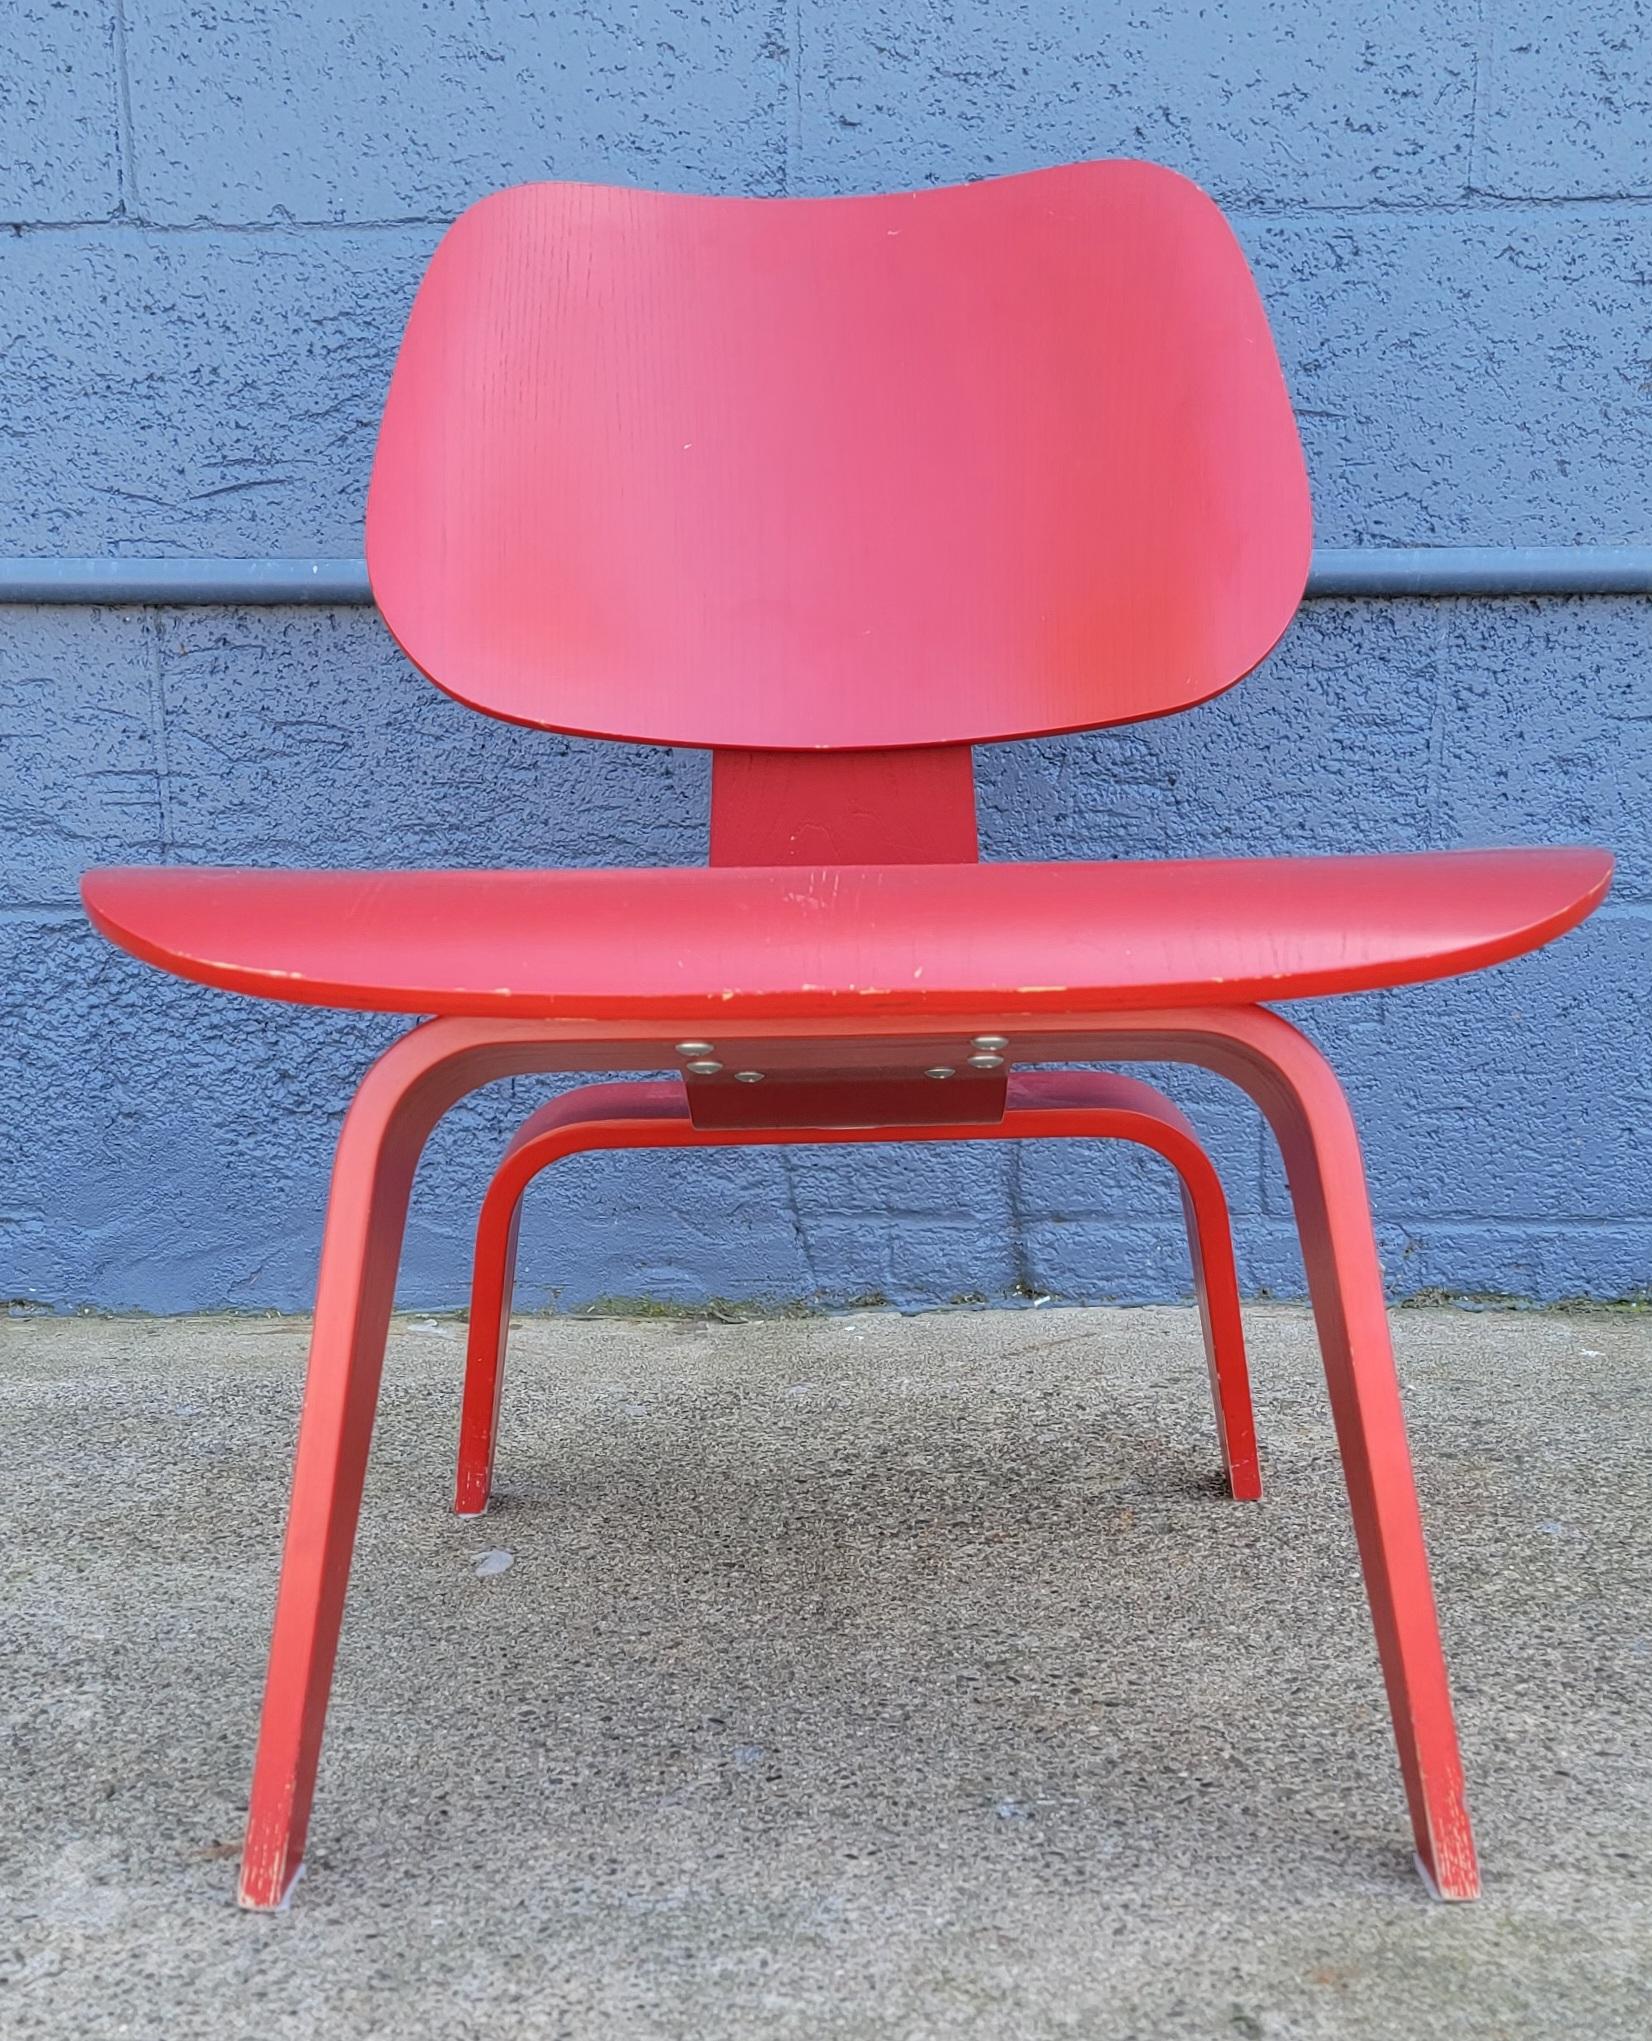 Classic Charles and Ray Eames LCW molded plywood lounge chair with original red paint. Retains Eames / Herman Miller label. Very sturdy construction.